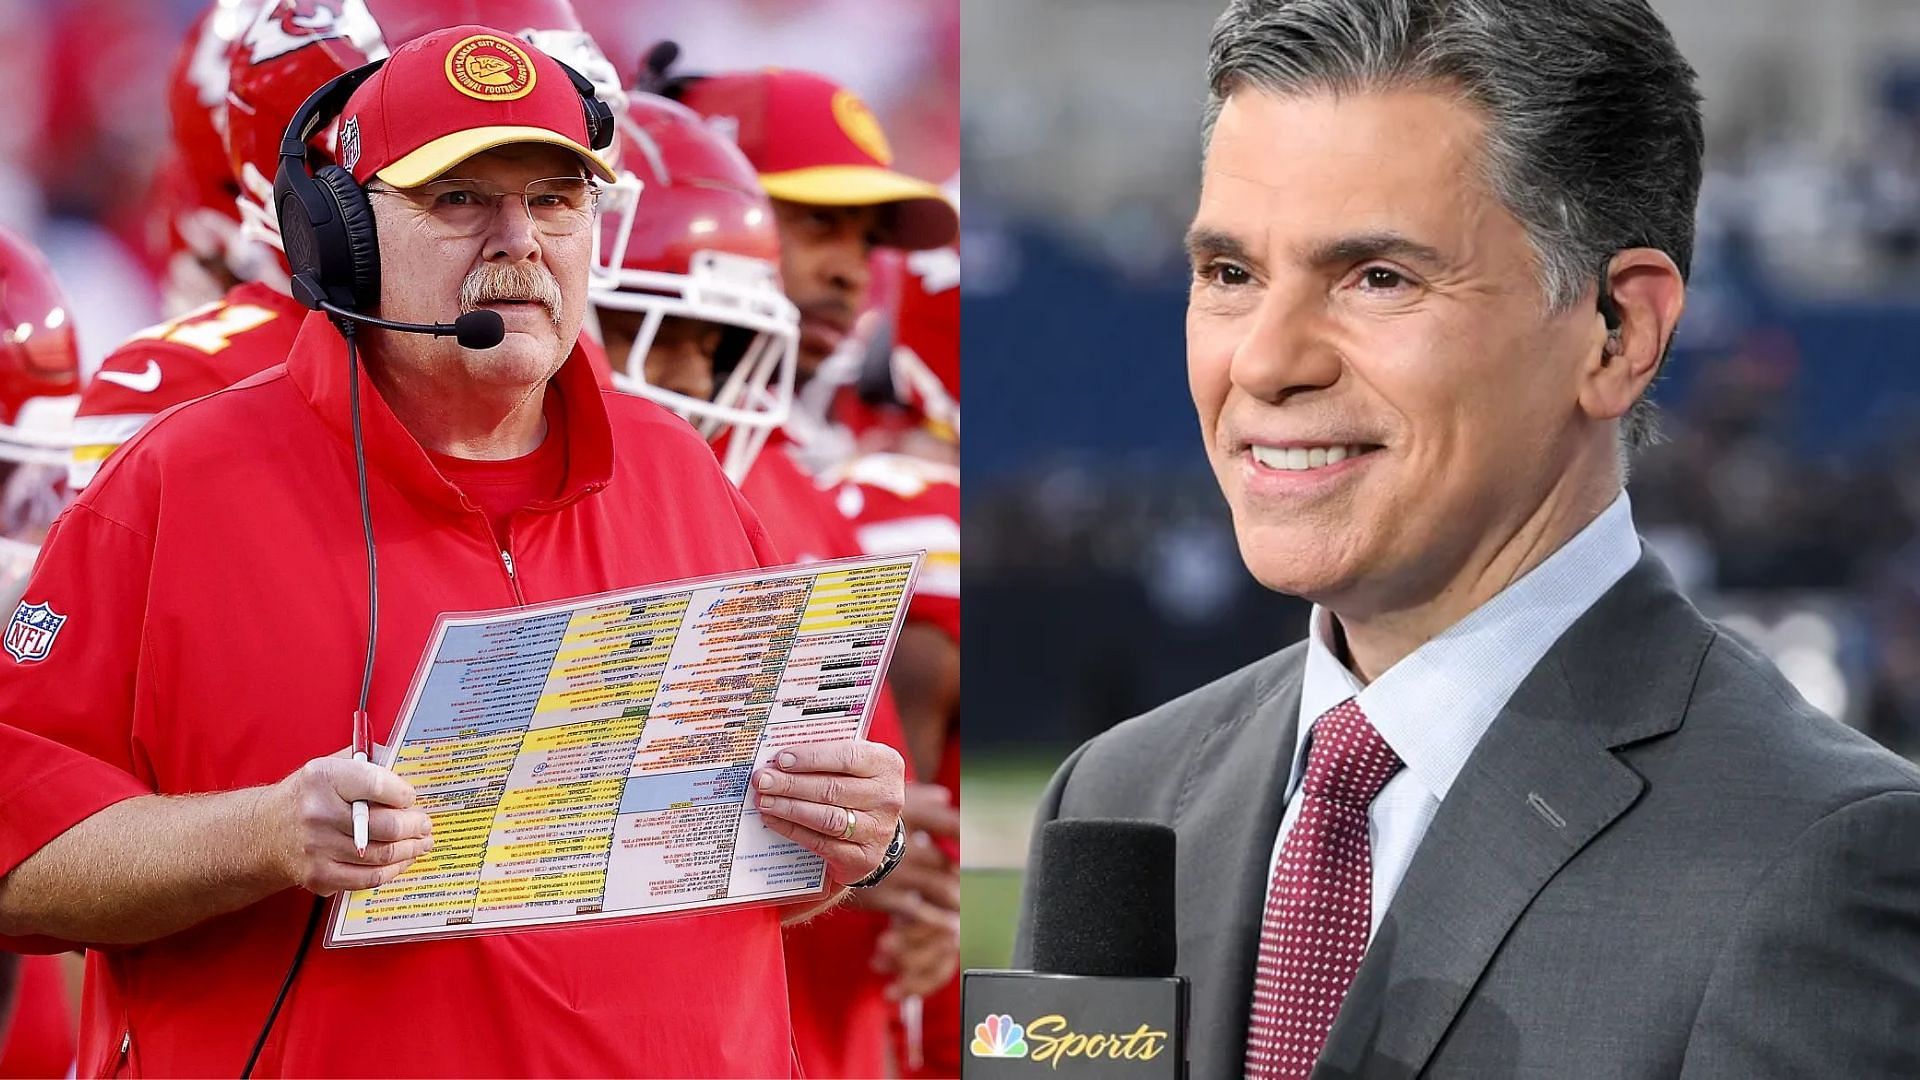 Mike Florio discusses Andy Reid